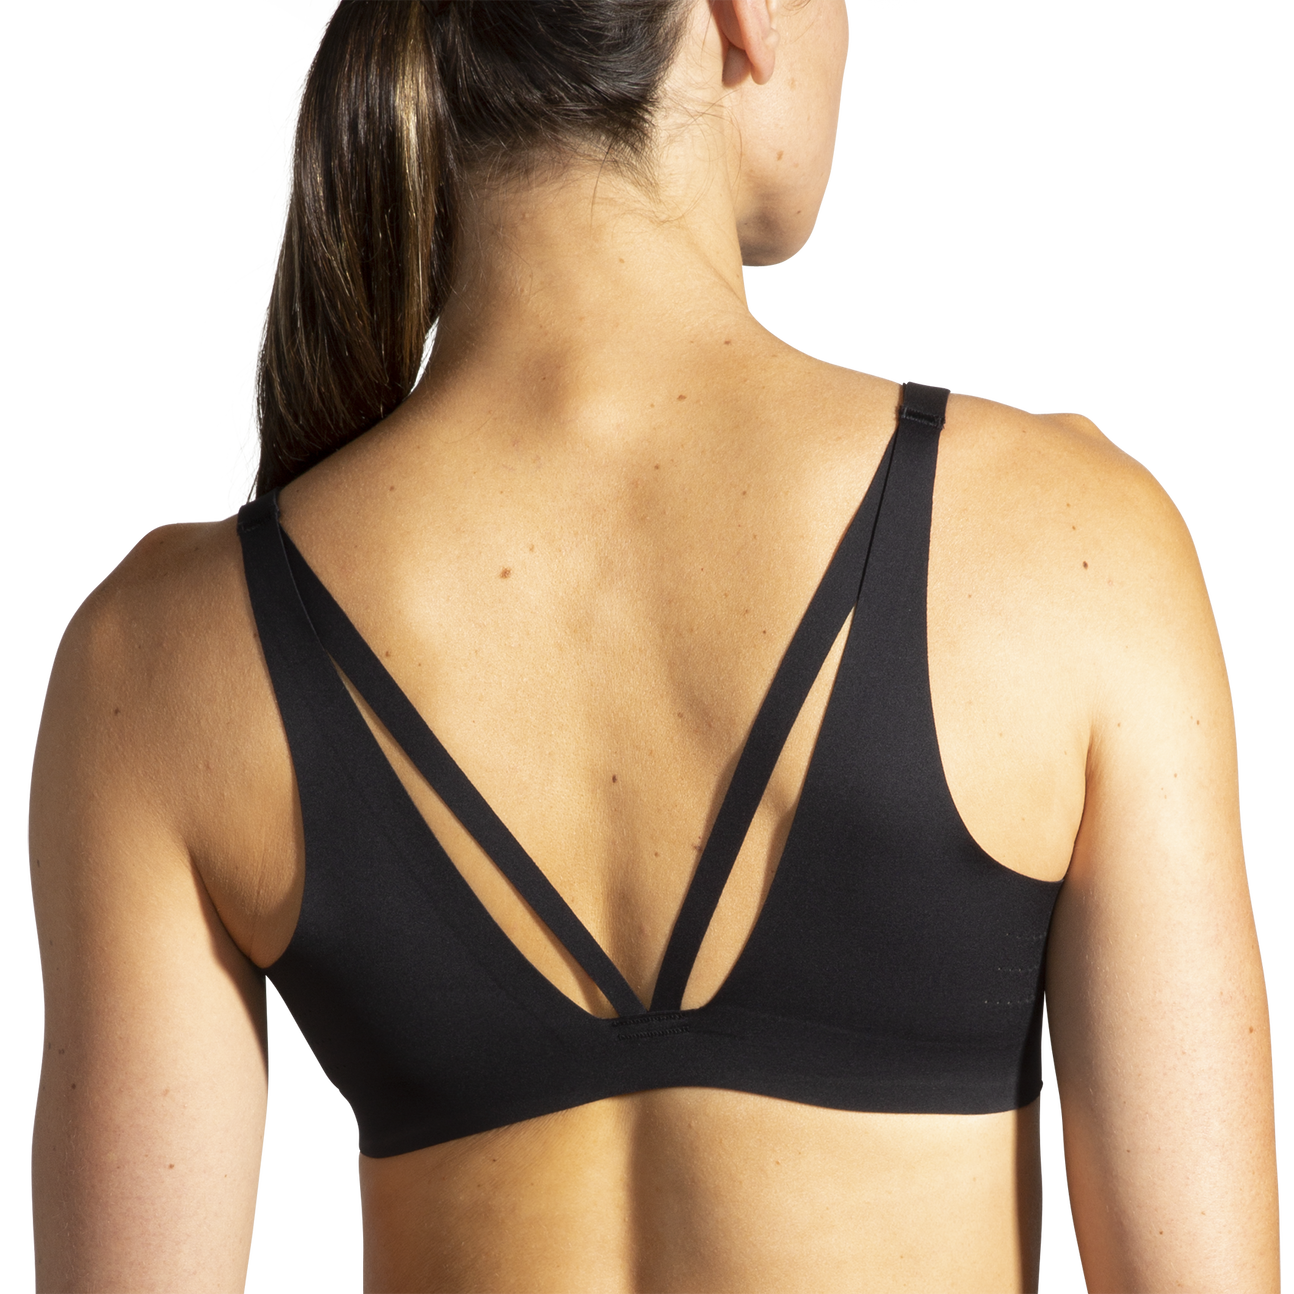 https://cdn.shopify.com/s/files/1/0258/5411/5893/products/350087-001-mb-dare-strappy-womens-running-bra.png?v=1645412037